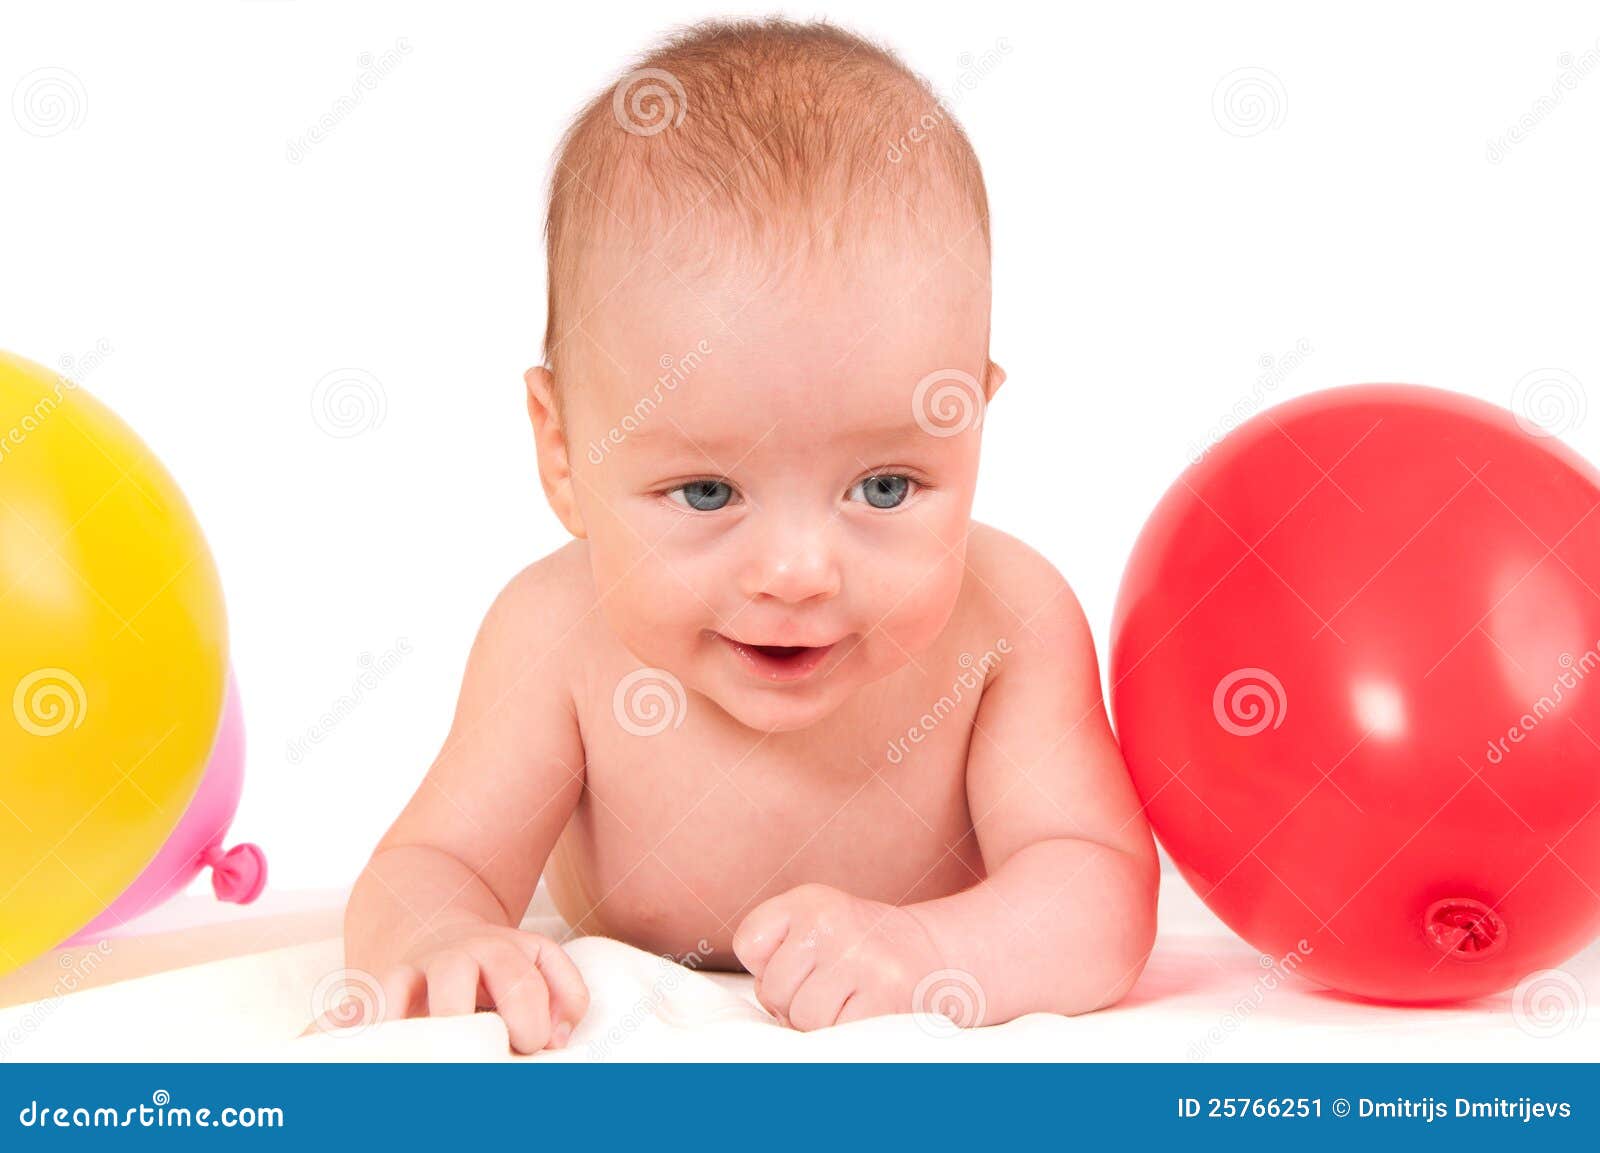 Cute Baby Portrait Isolated on White Stock Image - Image of human, cute ...